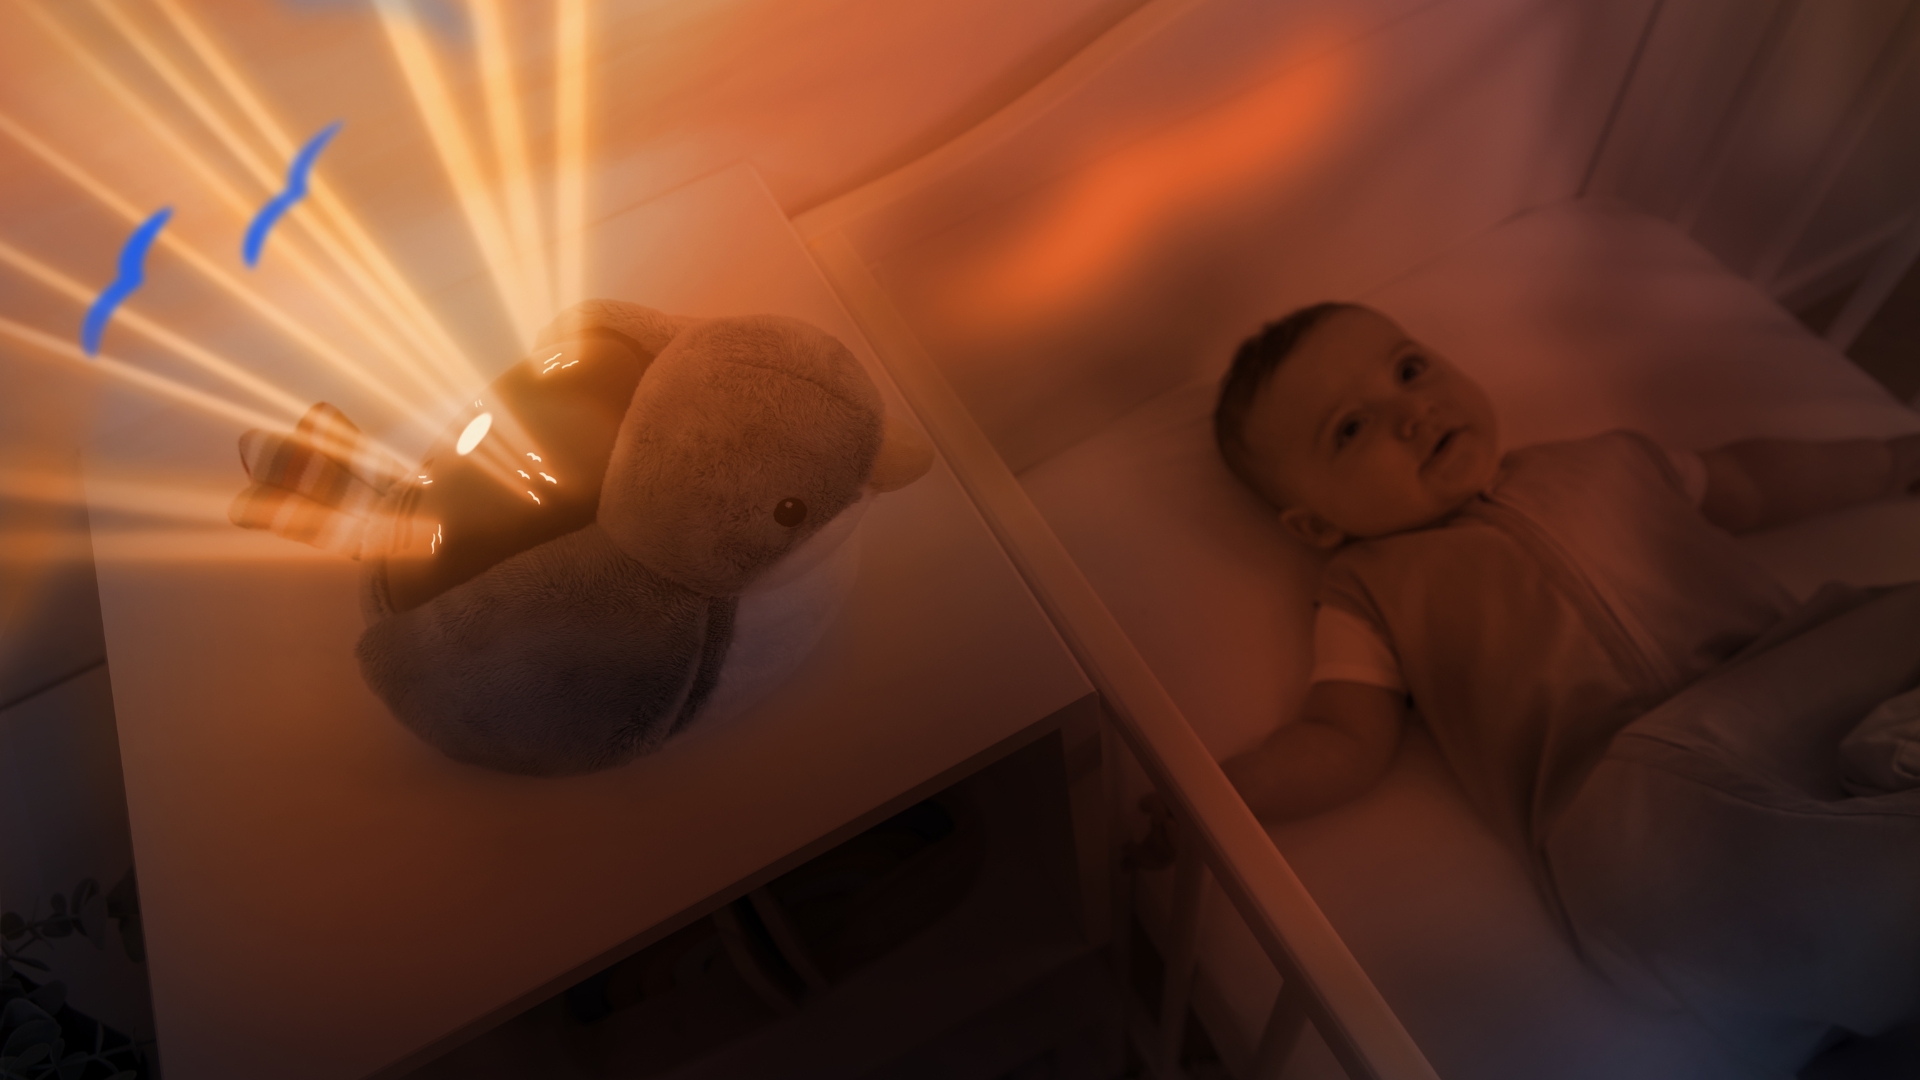 Red light: the solution for children who can’t fall asleep